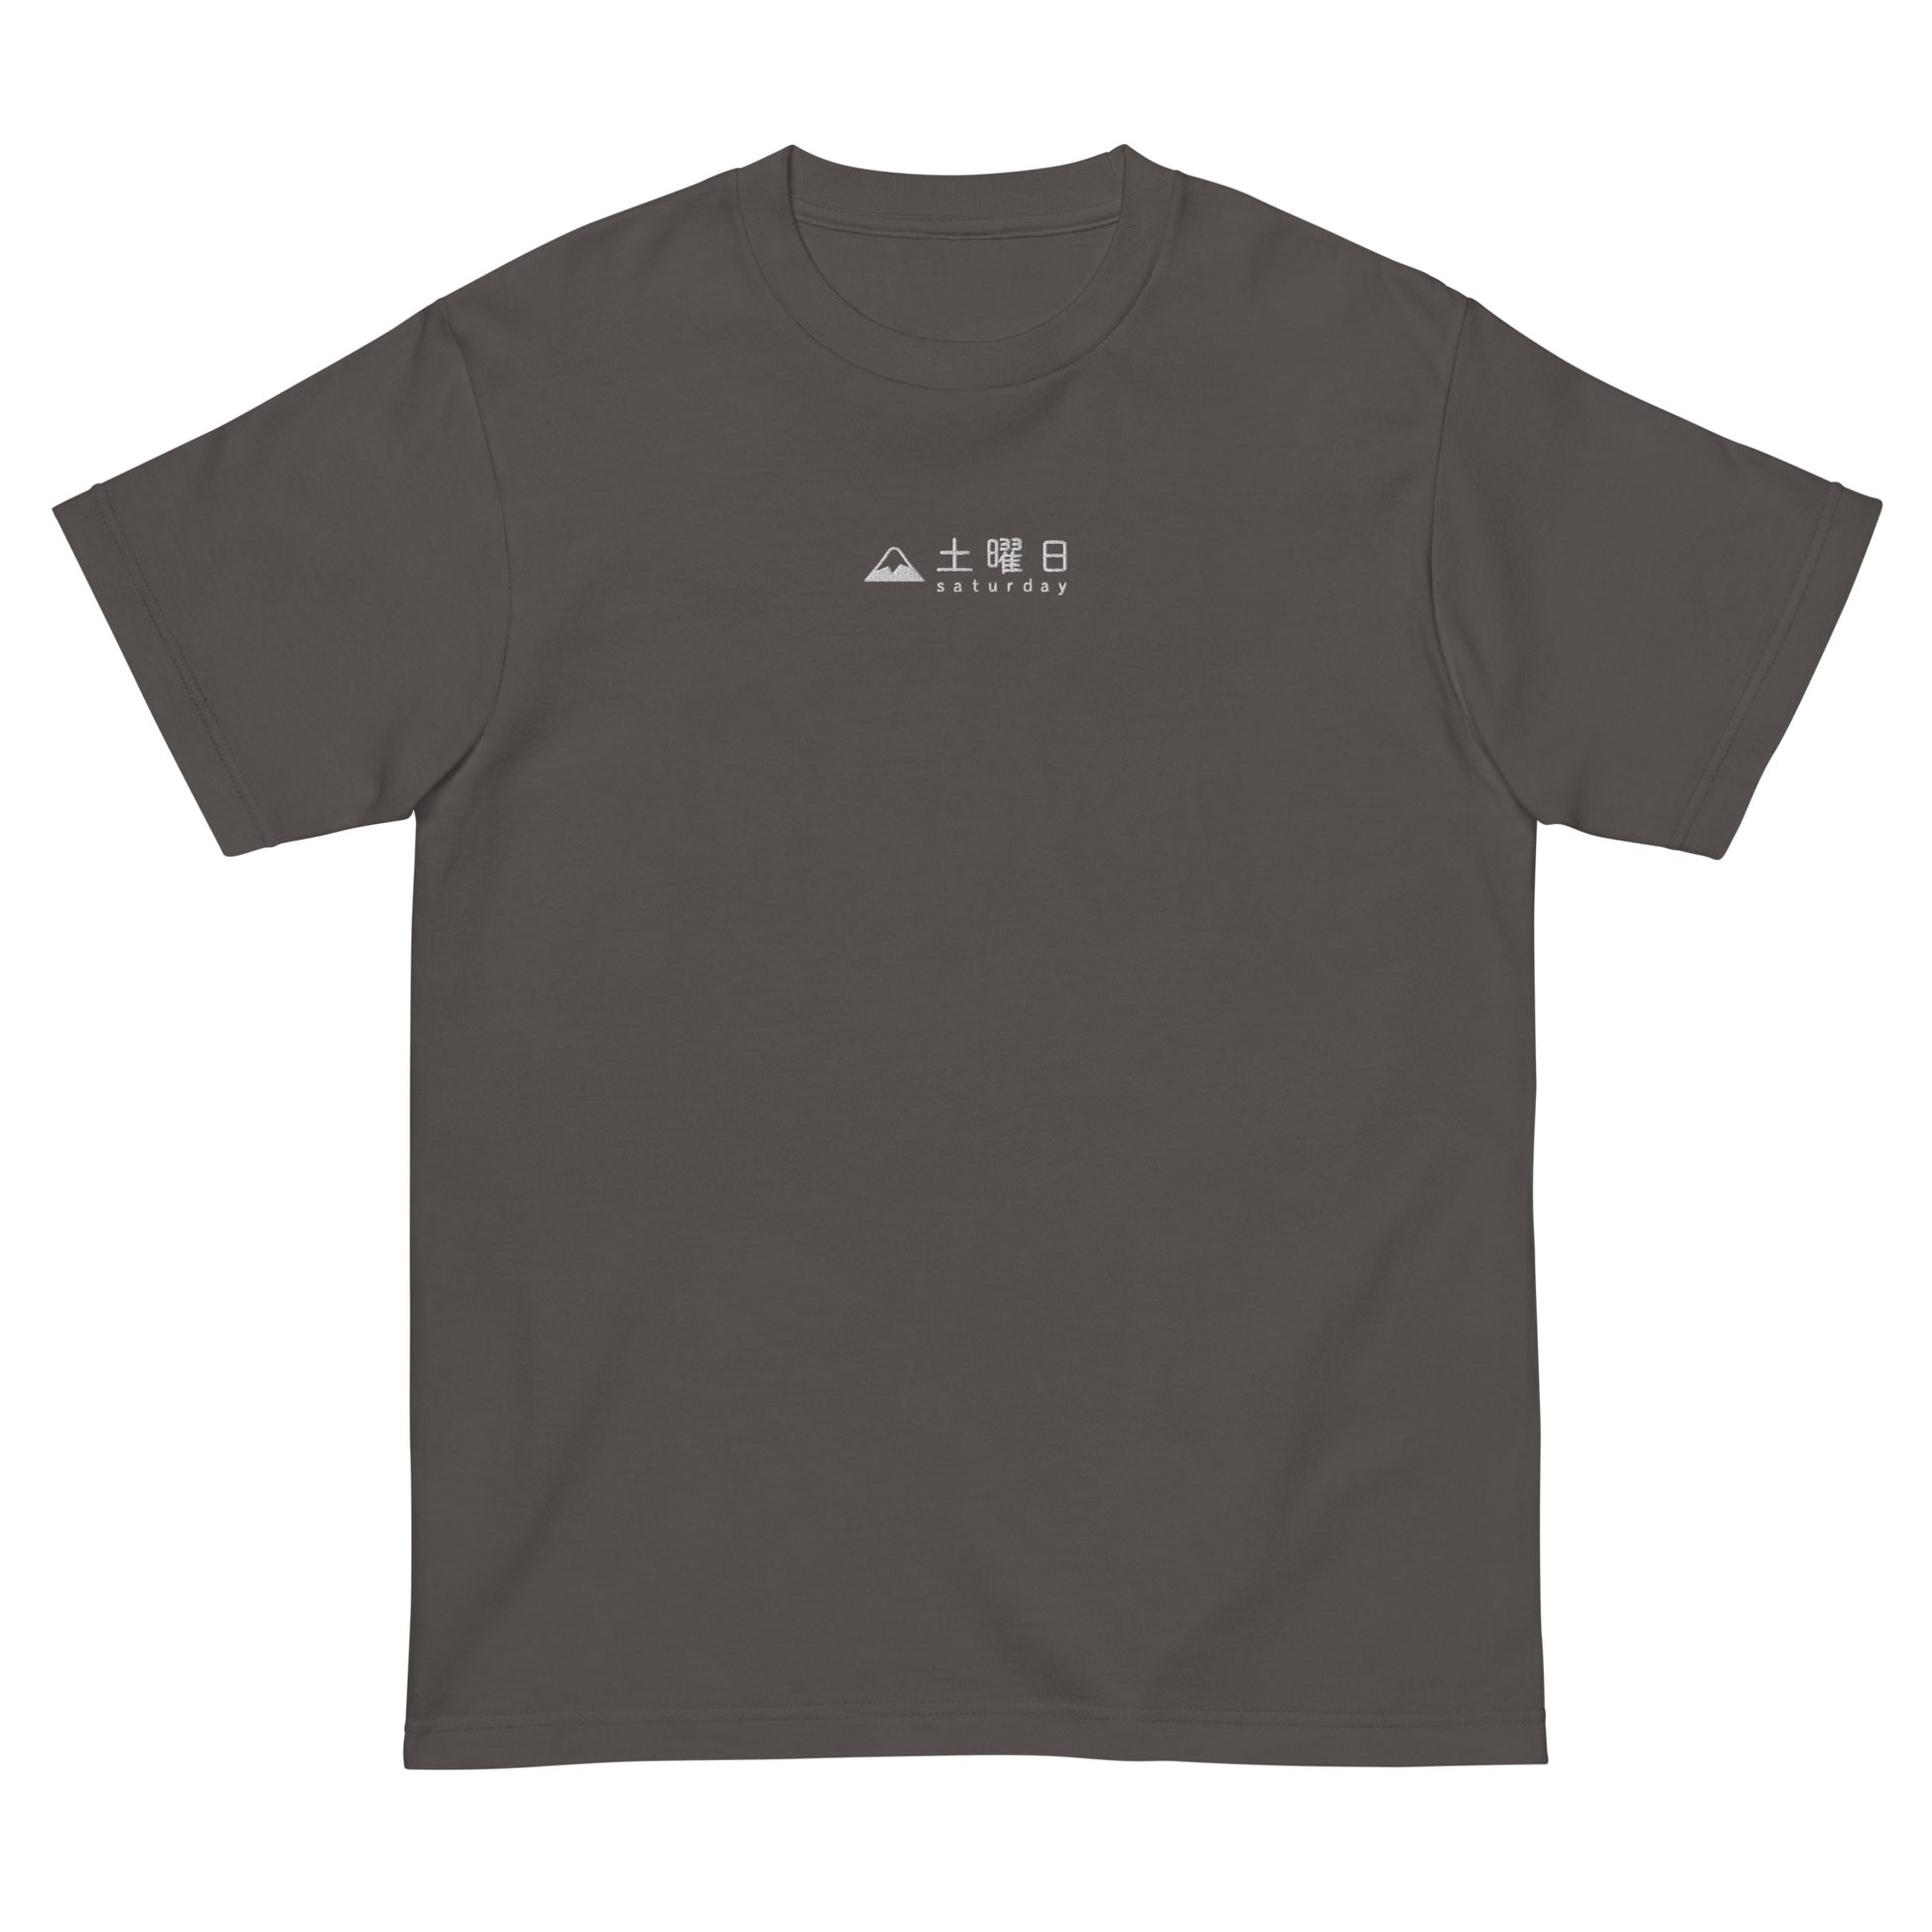 Dark Gray High Quality Tee - Front Design with an Black Embroidery "Saturday" in Japanese and English